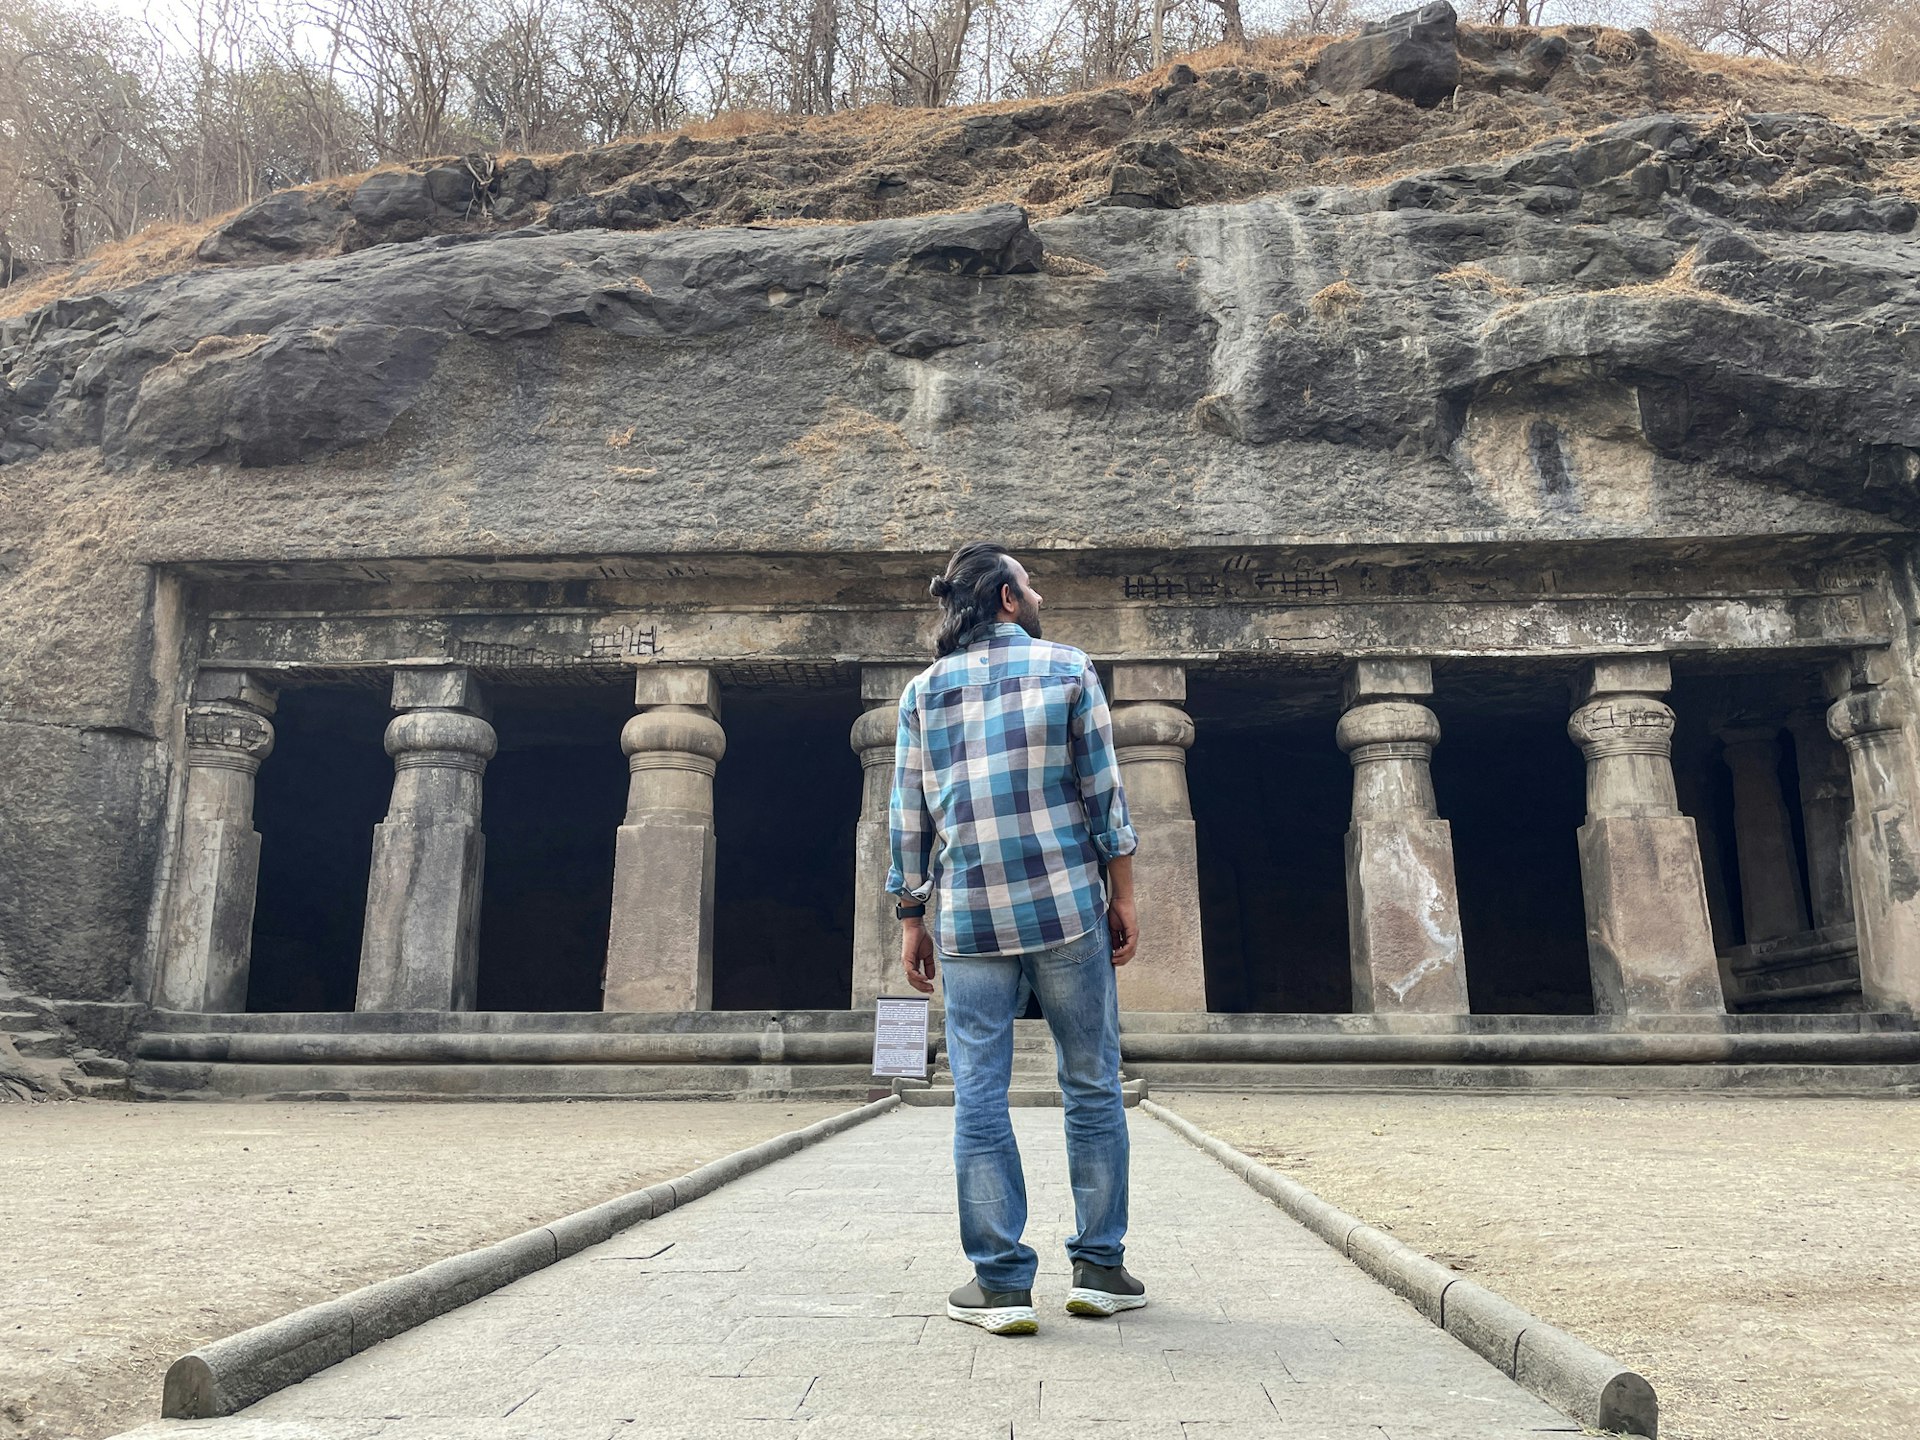 A man stands in front of the entrance to the Elephanta Caves, Mumbai